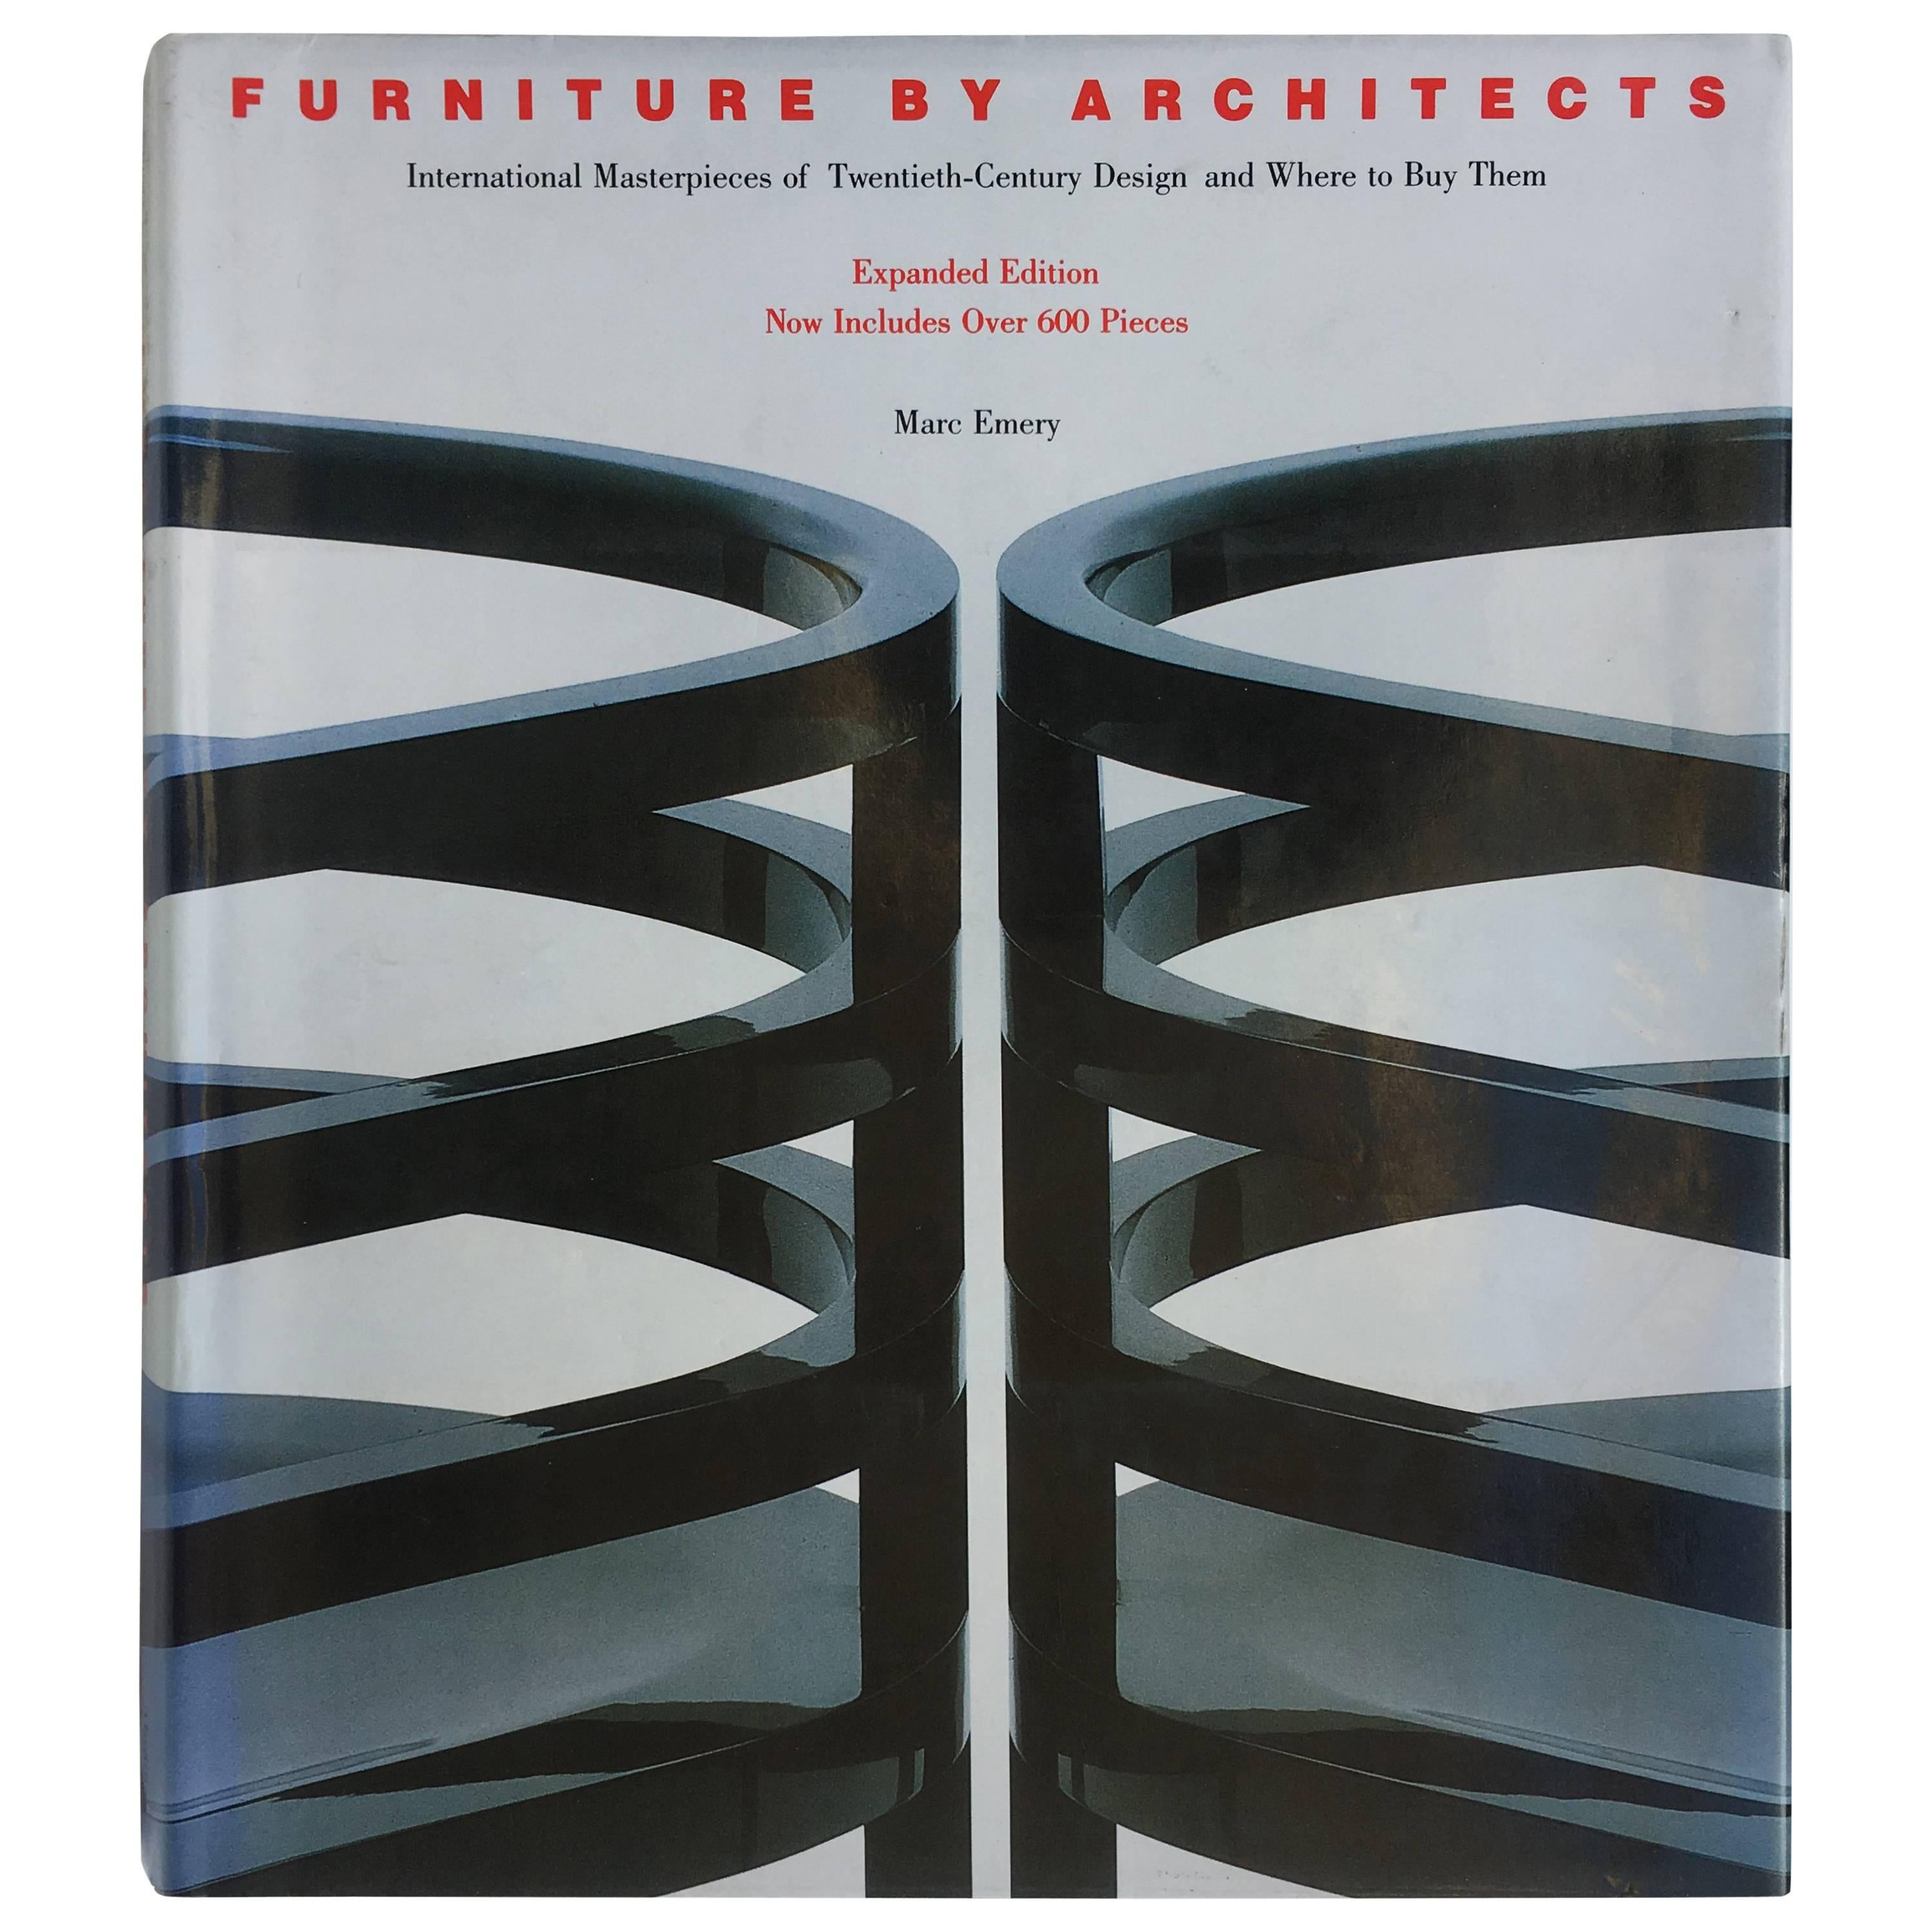 Furniture by Architects – Marc Emery 1988